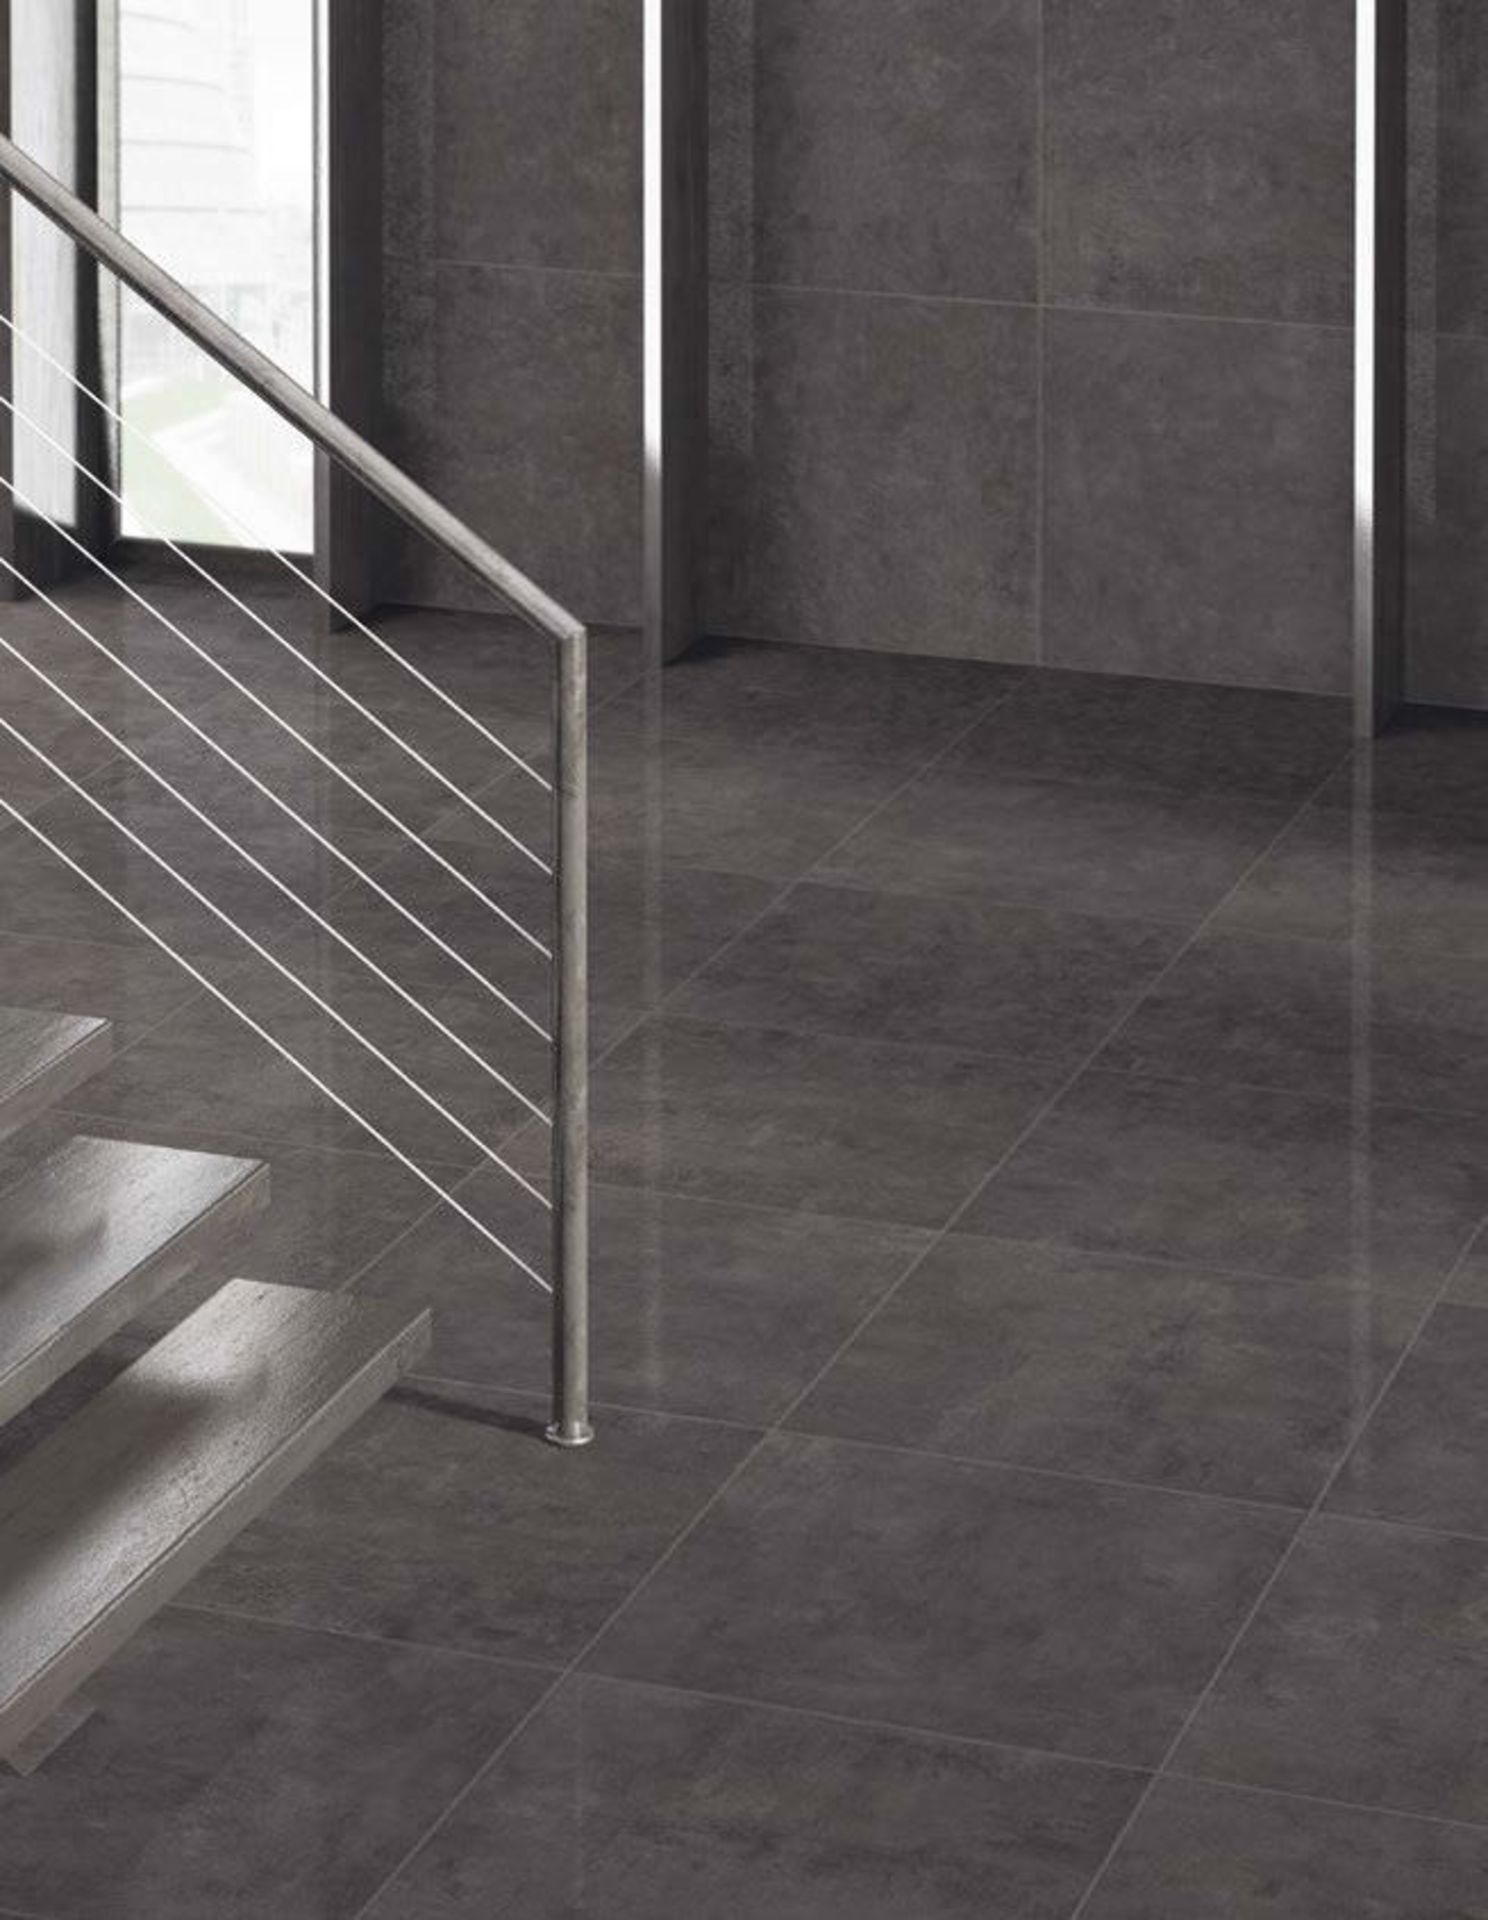 NEW 8.25 Square Meters of Milano Garfito Wall and Floor Tiles. 450x450mm per tile, 10mm Thick....